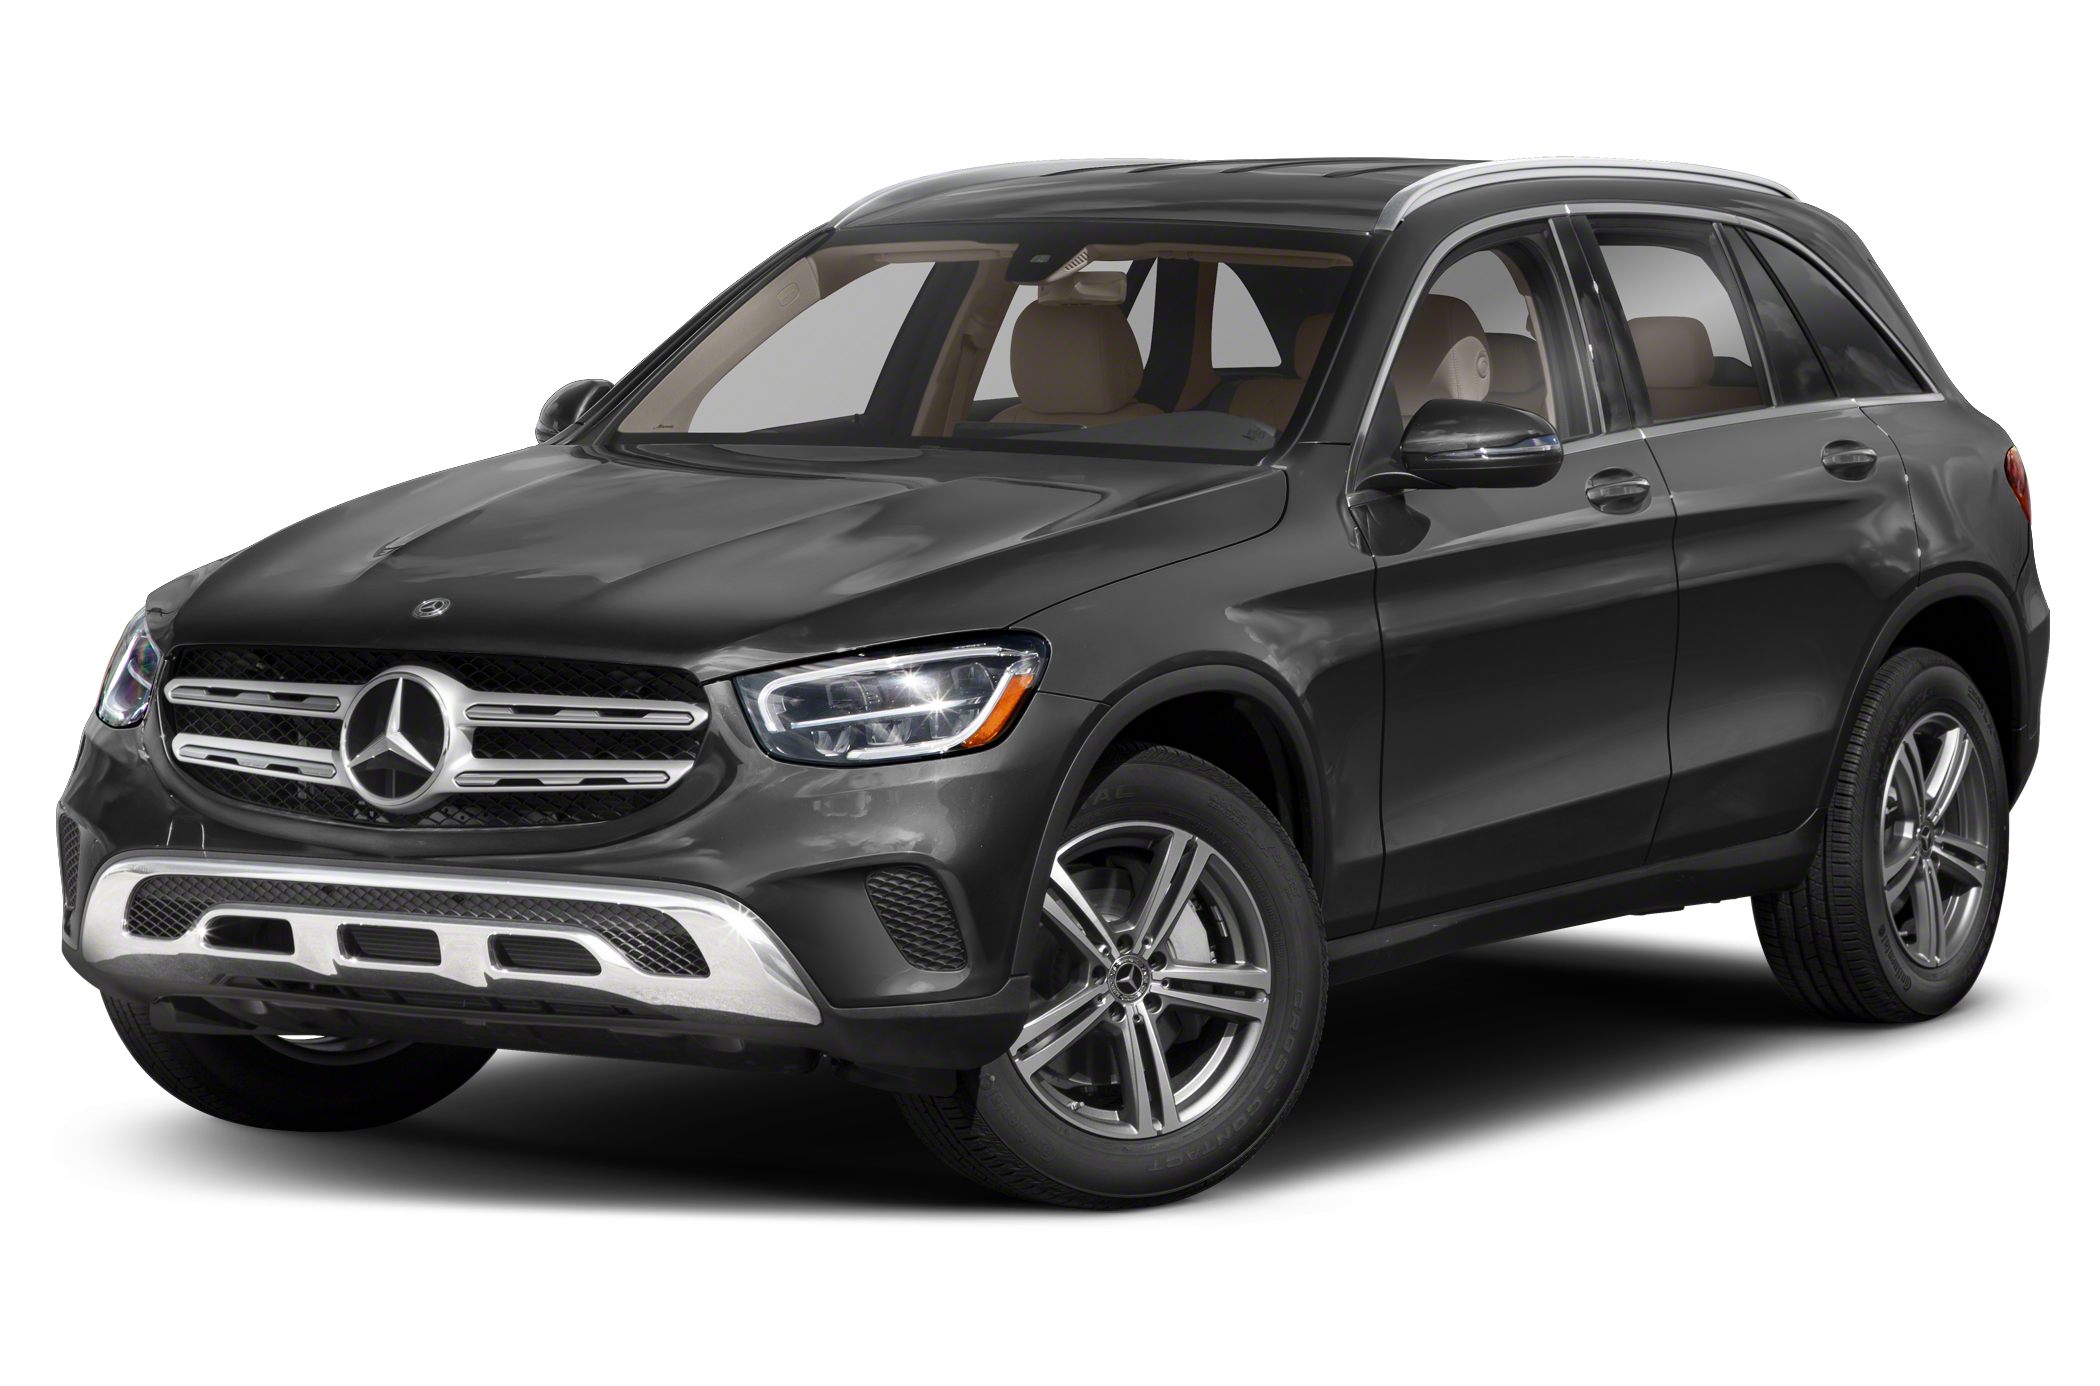 Mercedes Benz Glc 300 Specs And Prices